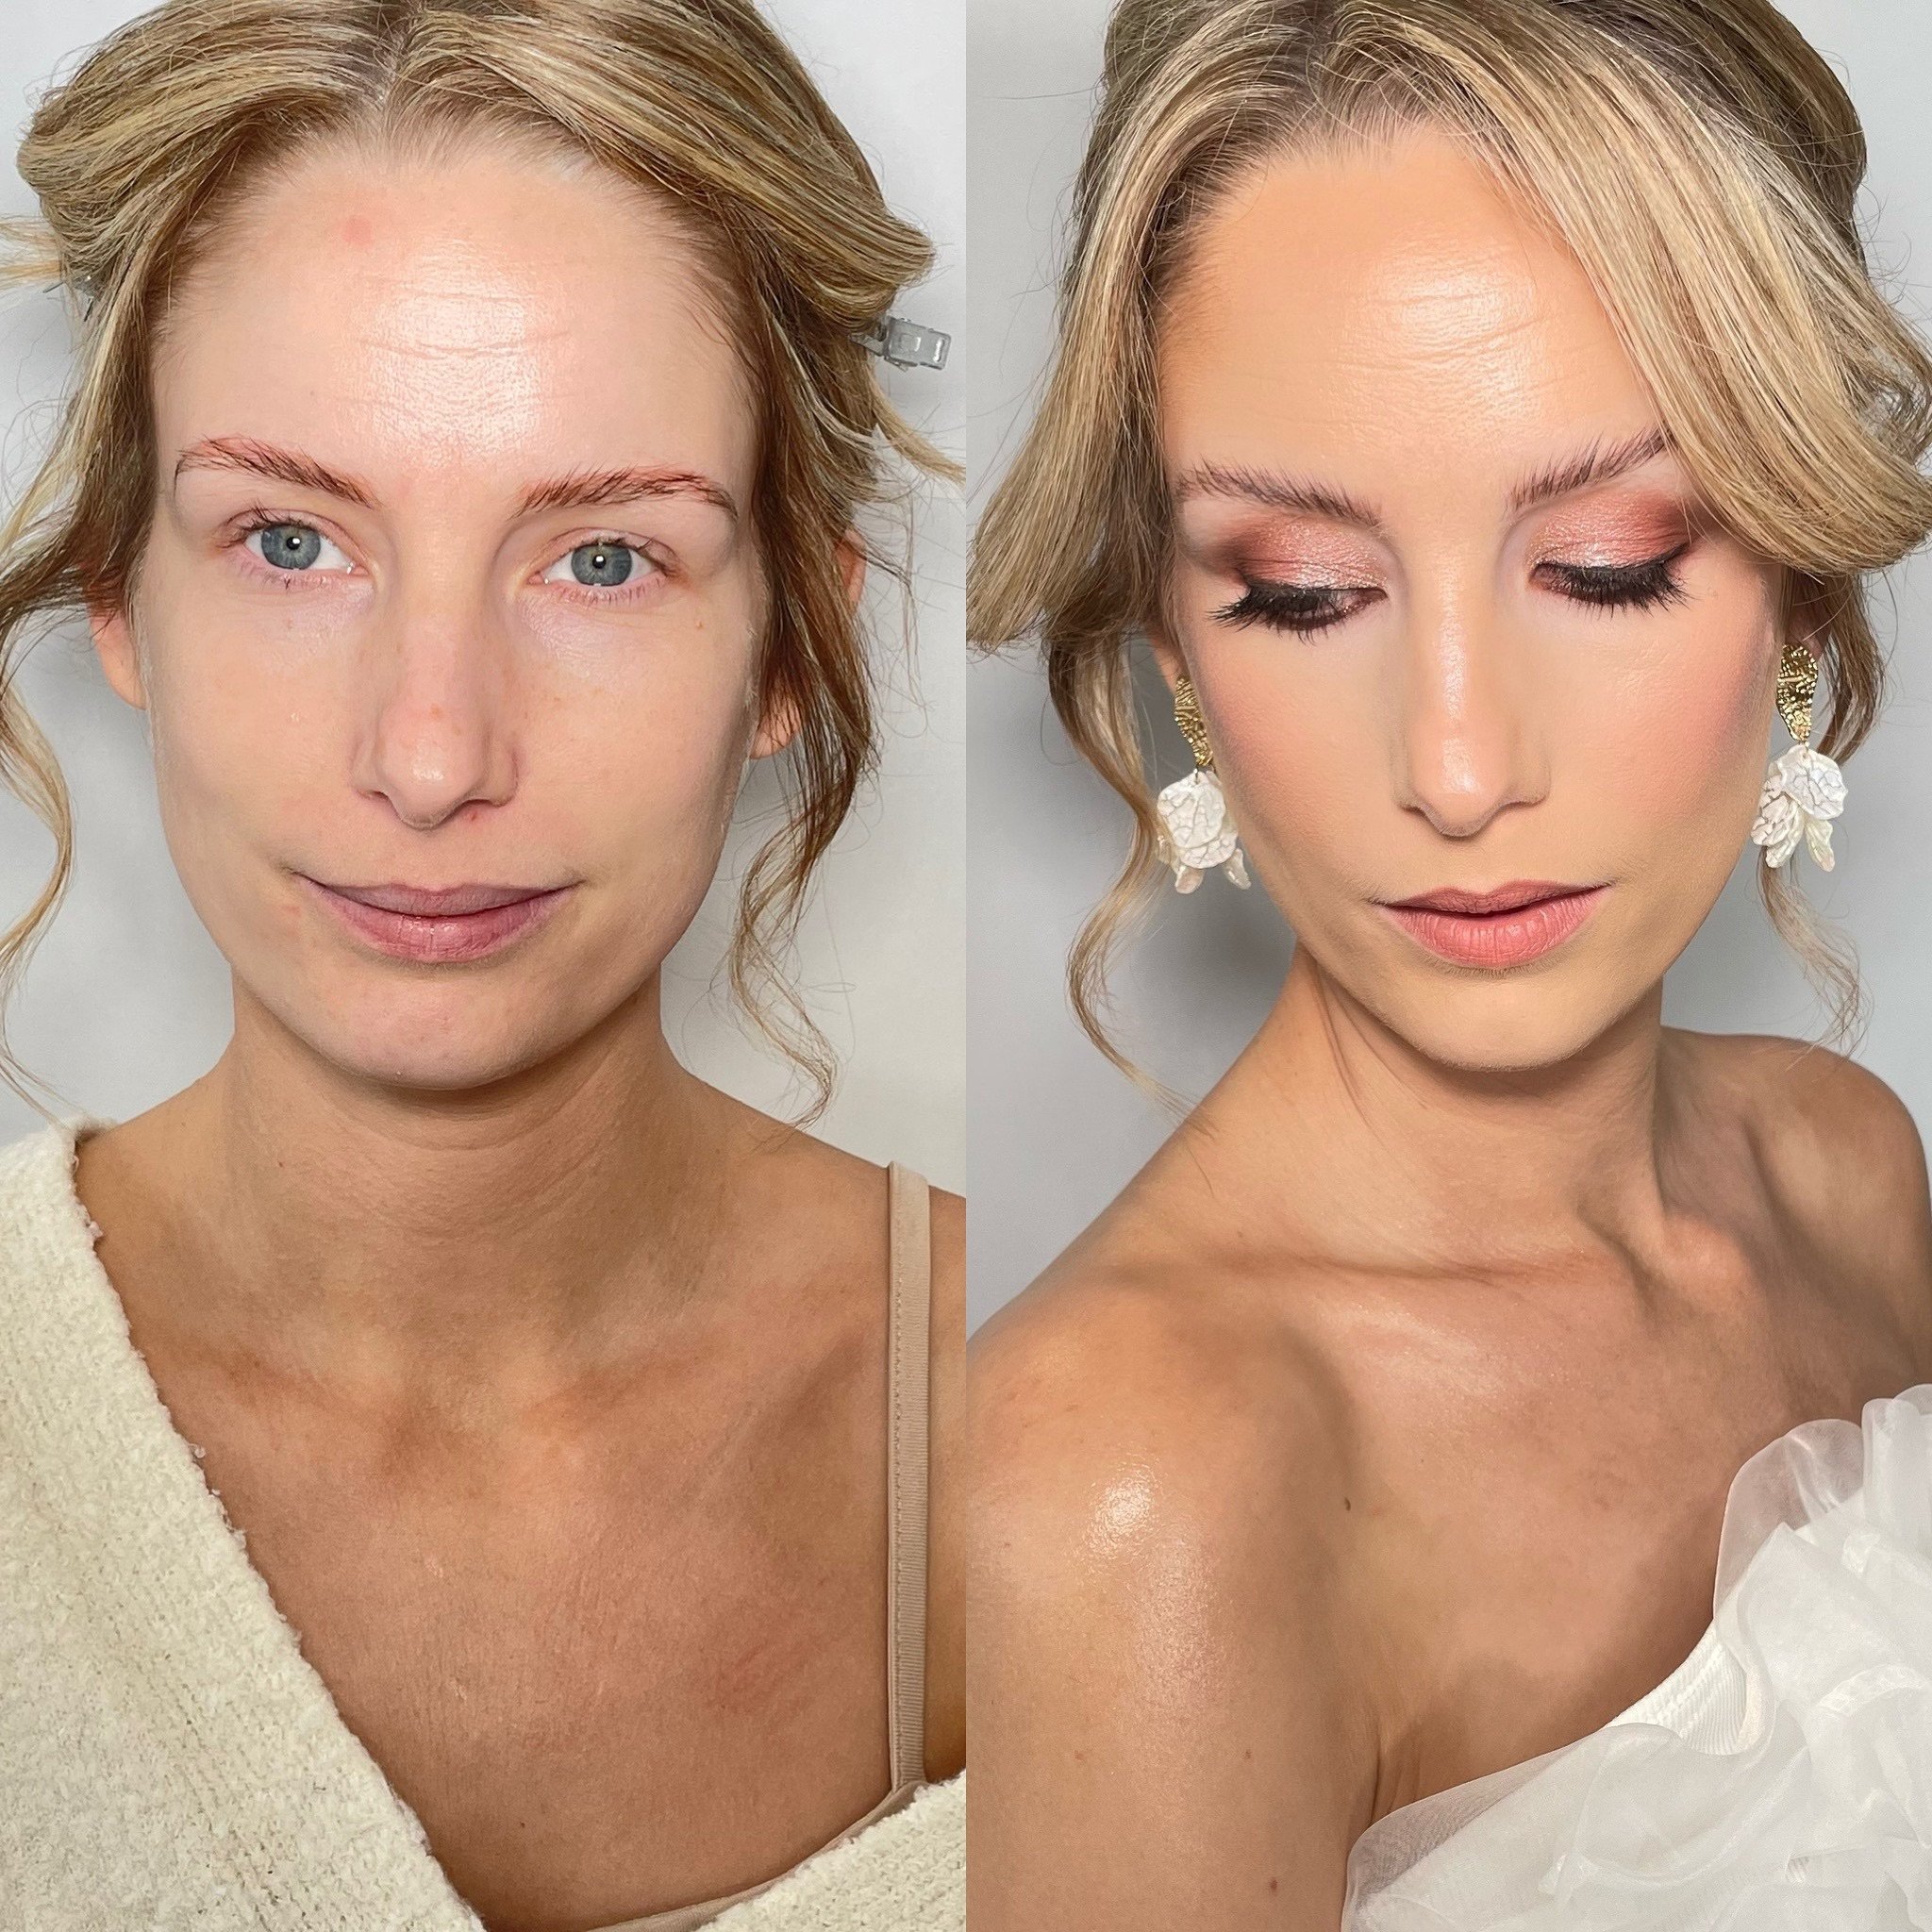 ✨ Why did I fall in love with makeup artistry? ✨

I attended my first makeup course 17 years ago 🥴 

I remember the makeup artist coming into the classroom and saying &ldquo;makeup is MAGIC, TRICK OF THE EYE, AN ILLUSION&rdquo; &hellip; I was hooked